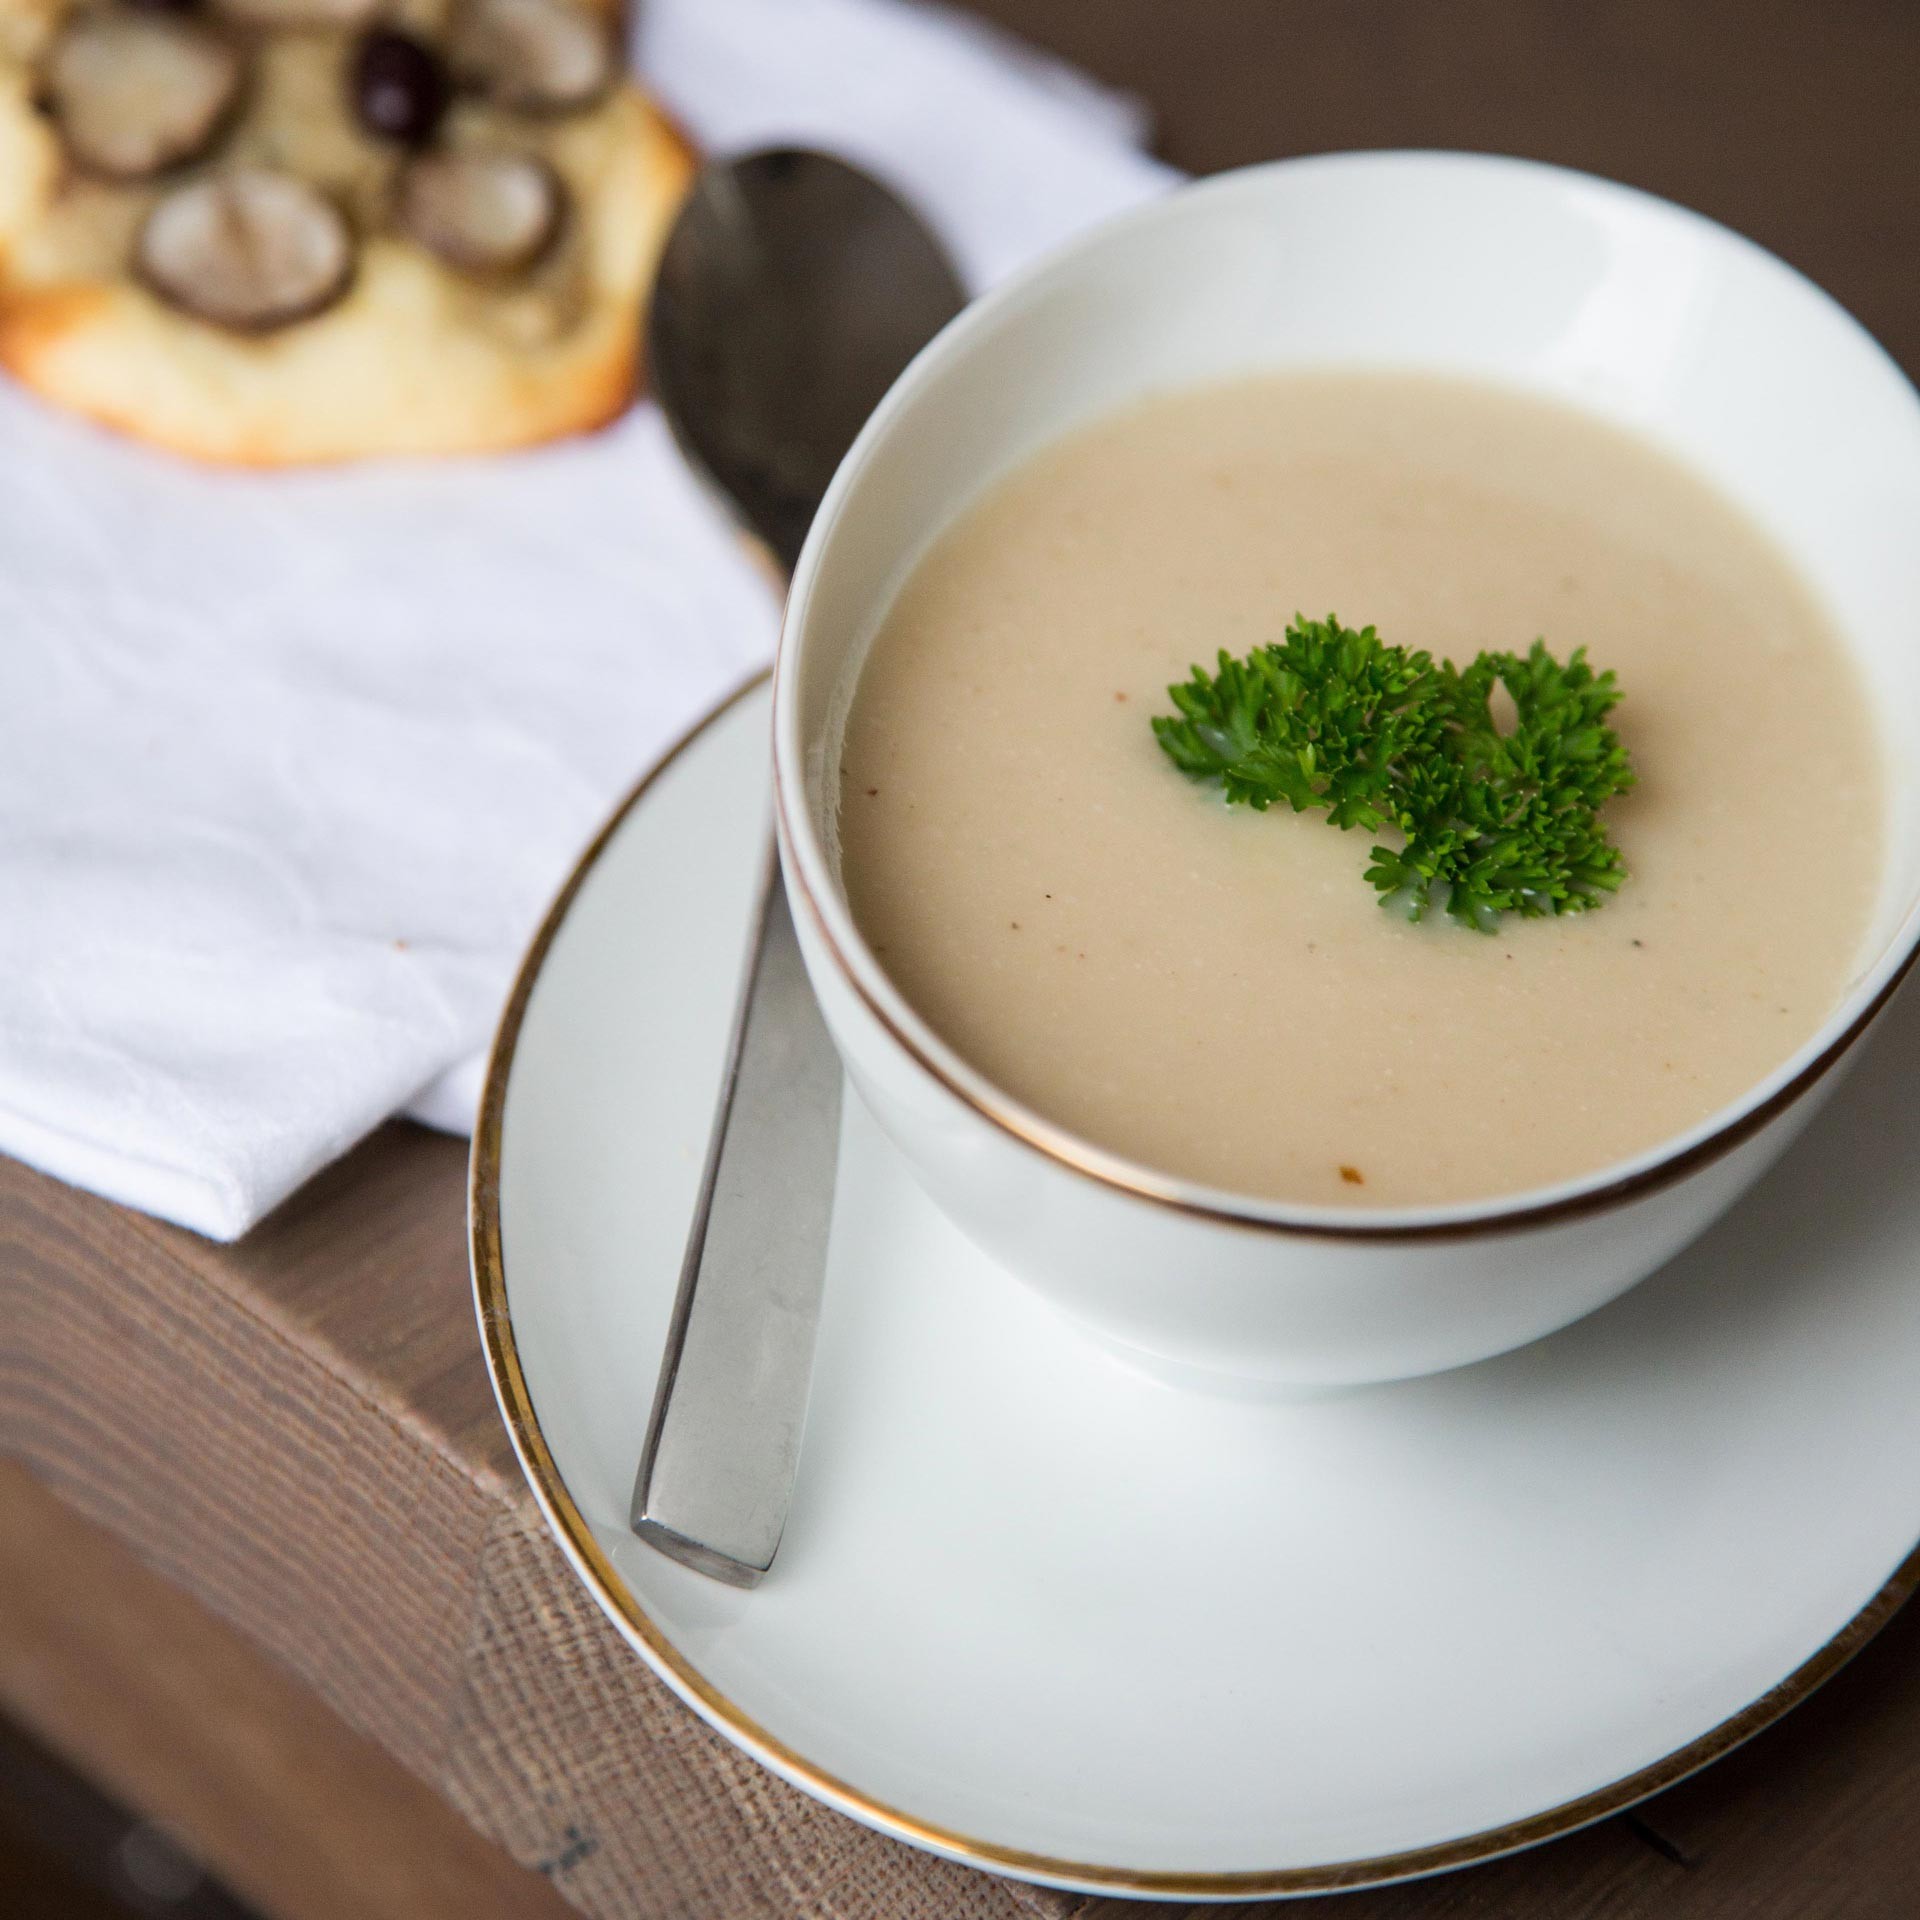 Spargelcreme-Suppe mit Croutons